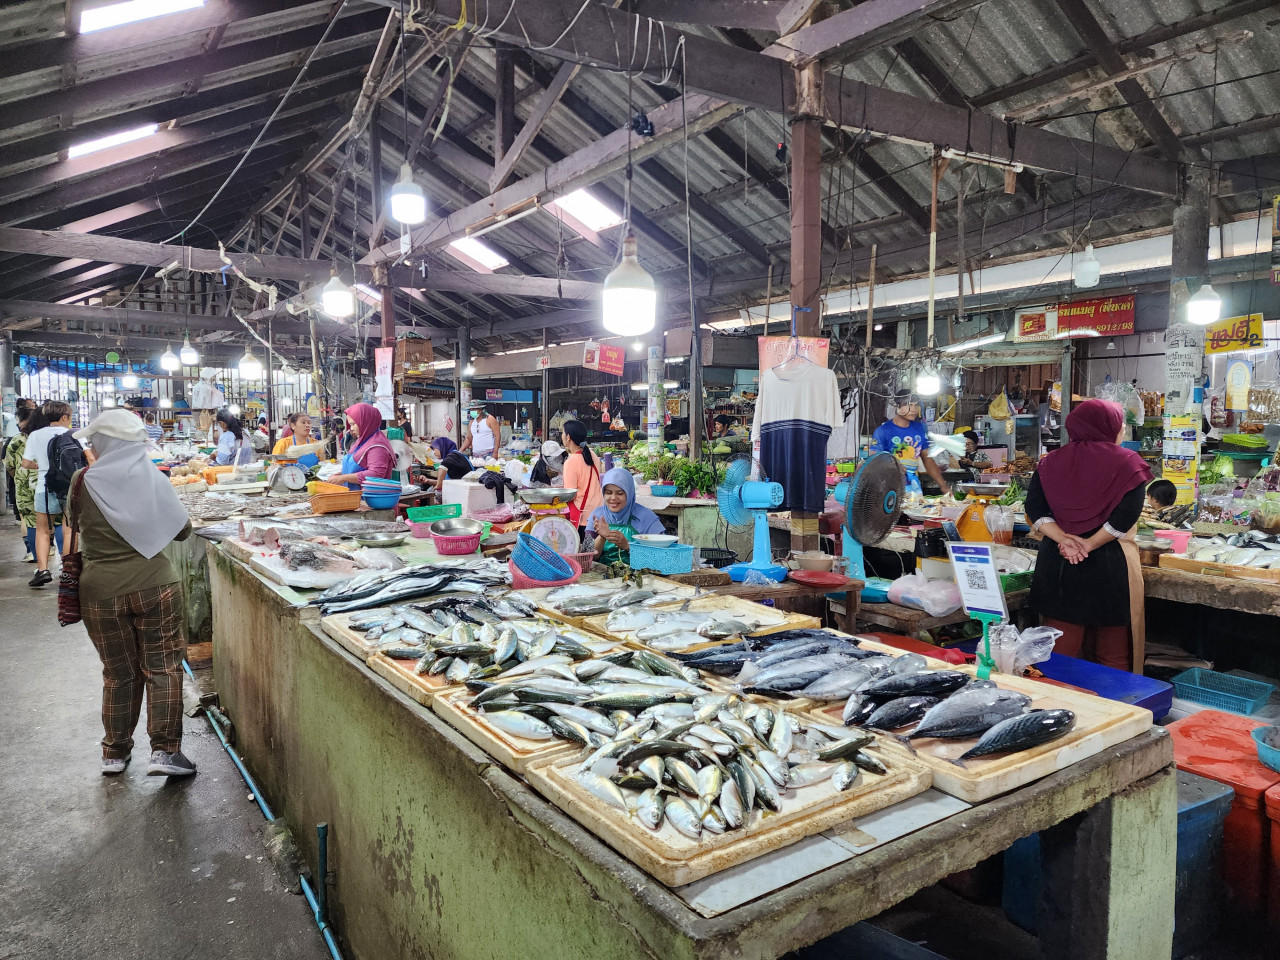 The Muslim fish market offers all kinds of fresh produce. – Pic by Shah Shamshiri